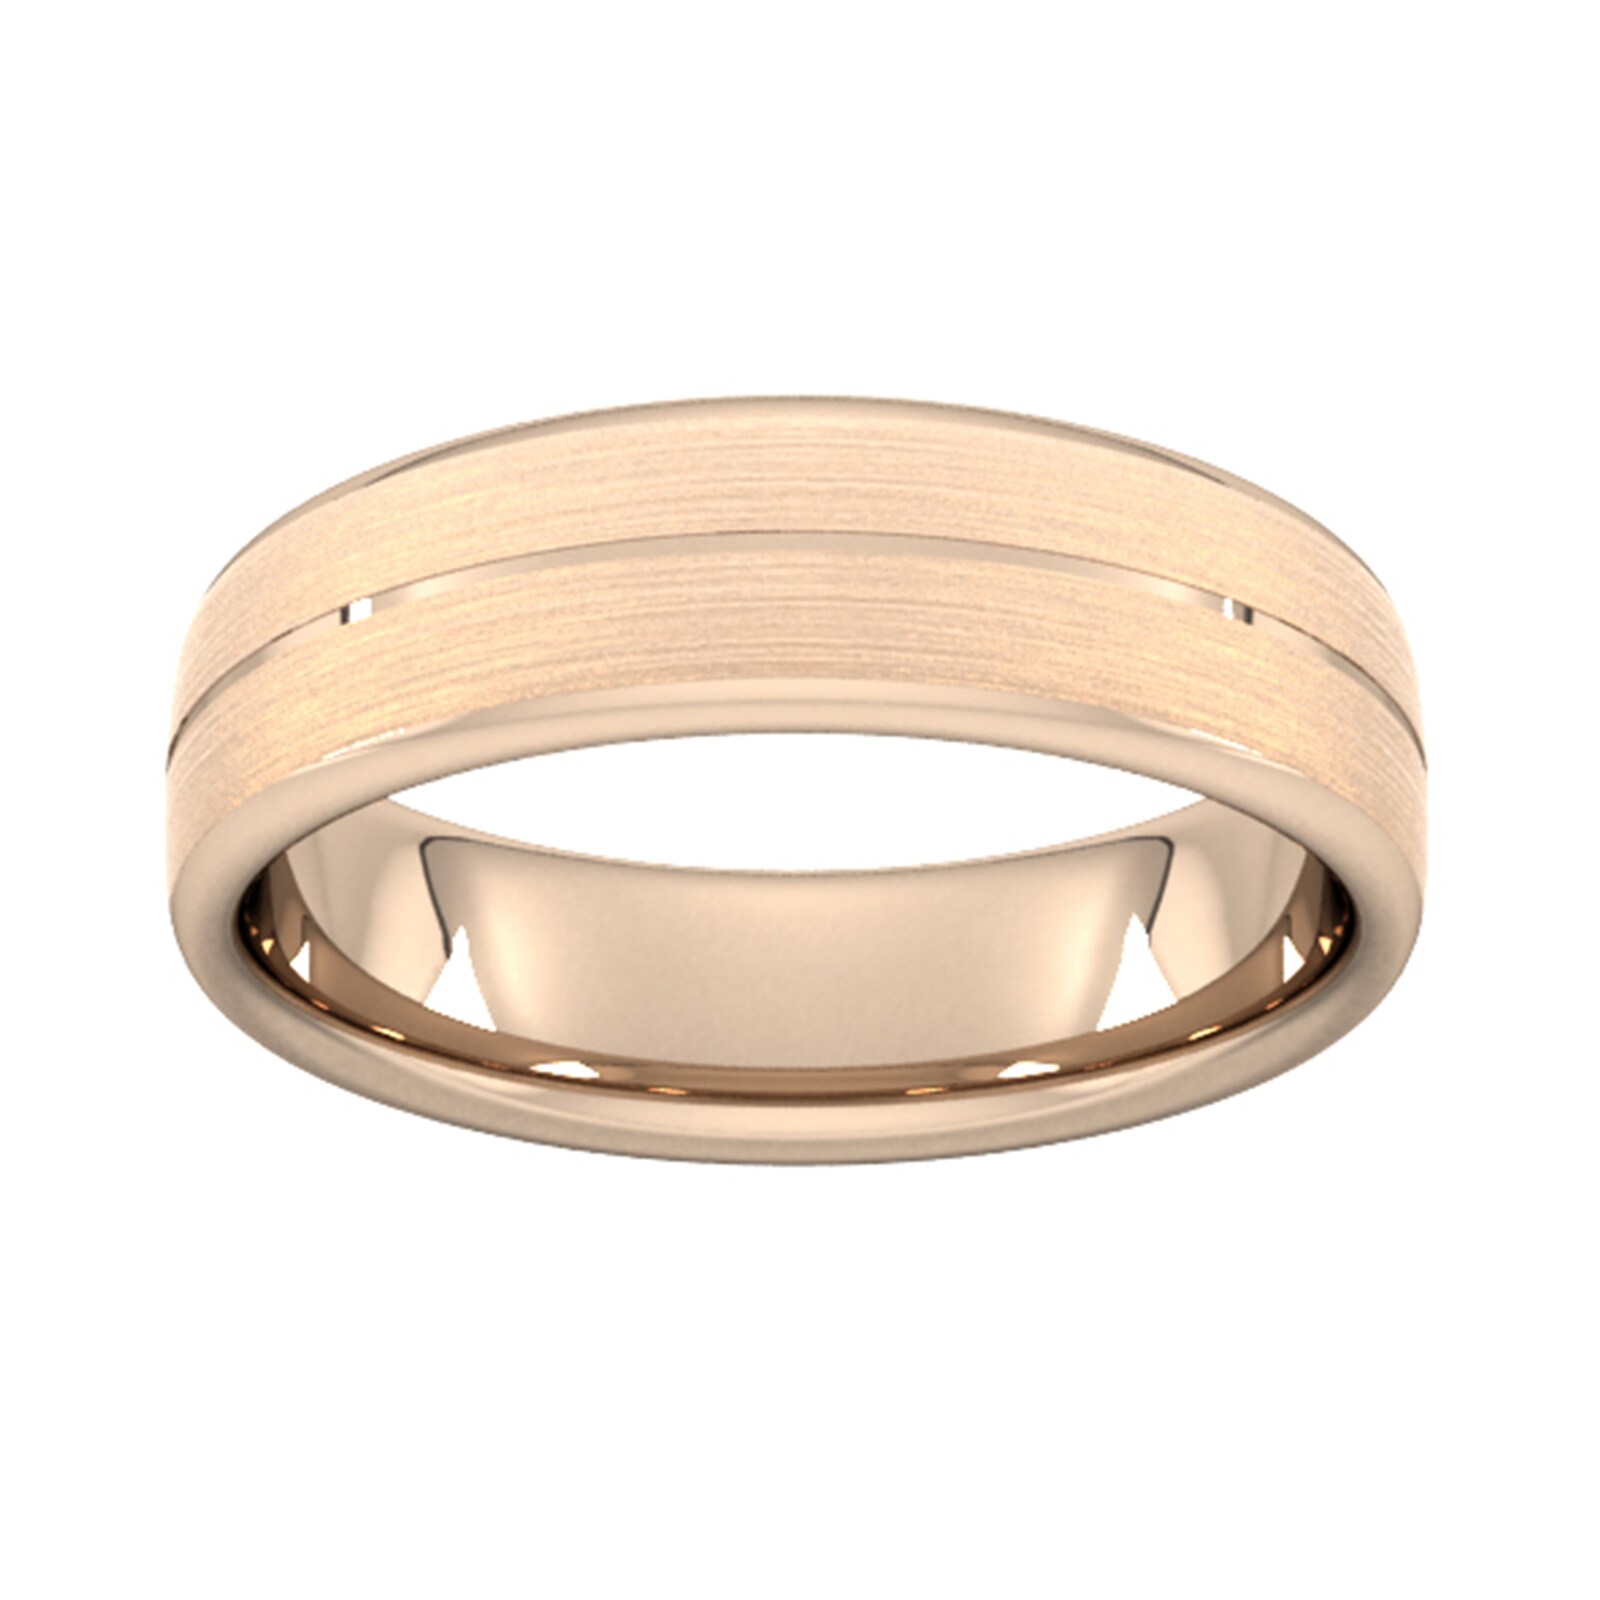 6mm D Shape Heavy Centre Groove With Chamfered Edge Wedding Ring In 9 Carat Rose Gold - Ring Size Q